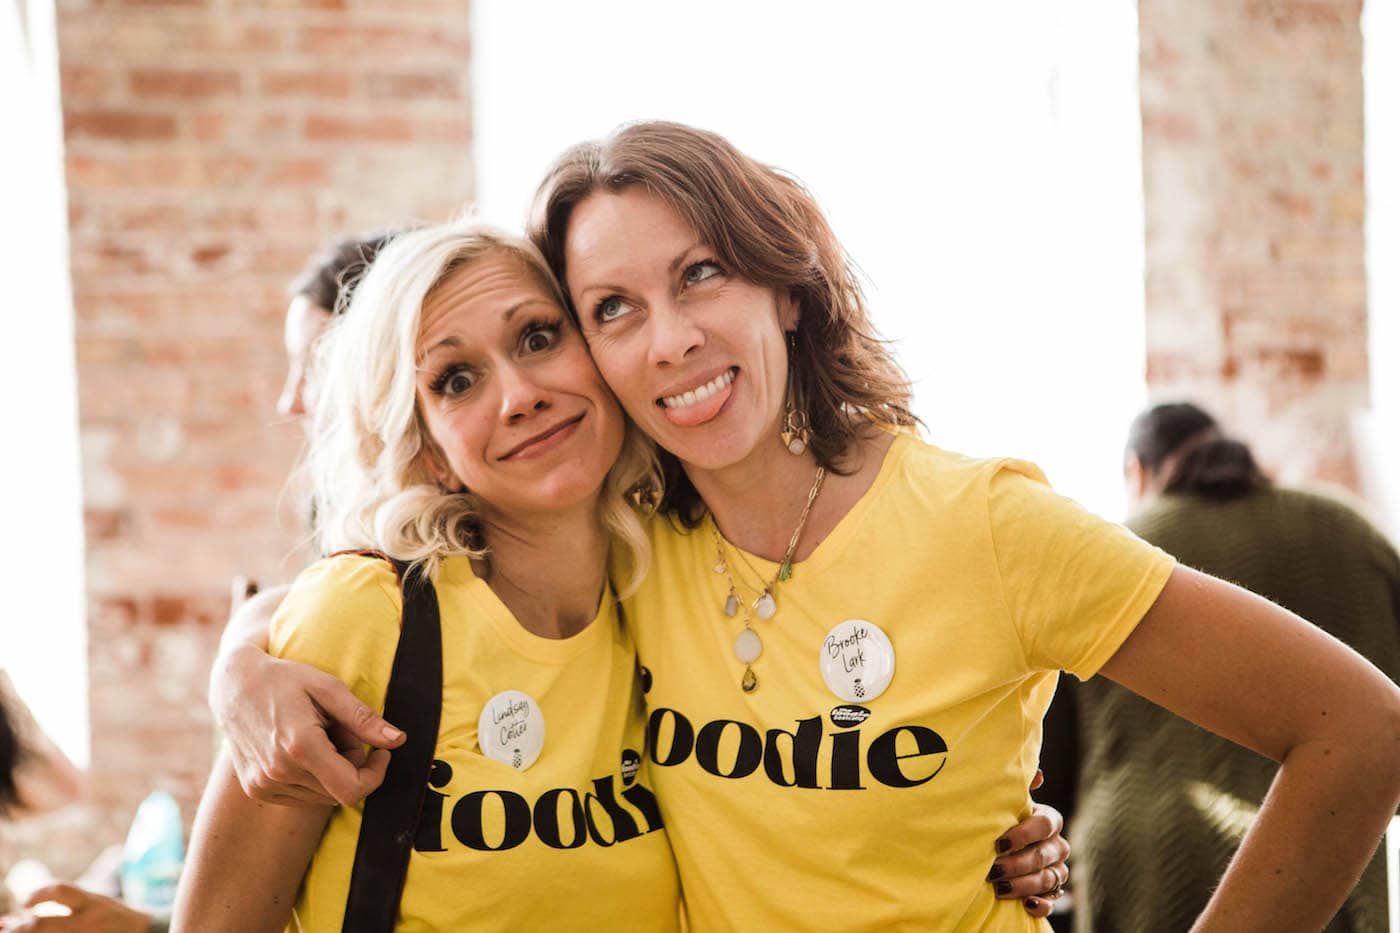 Two women in yellow shirts with black words 'foodie' across front.